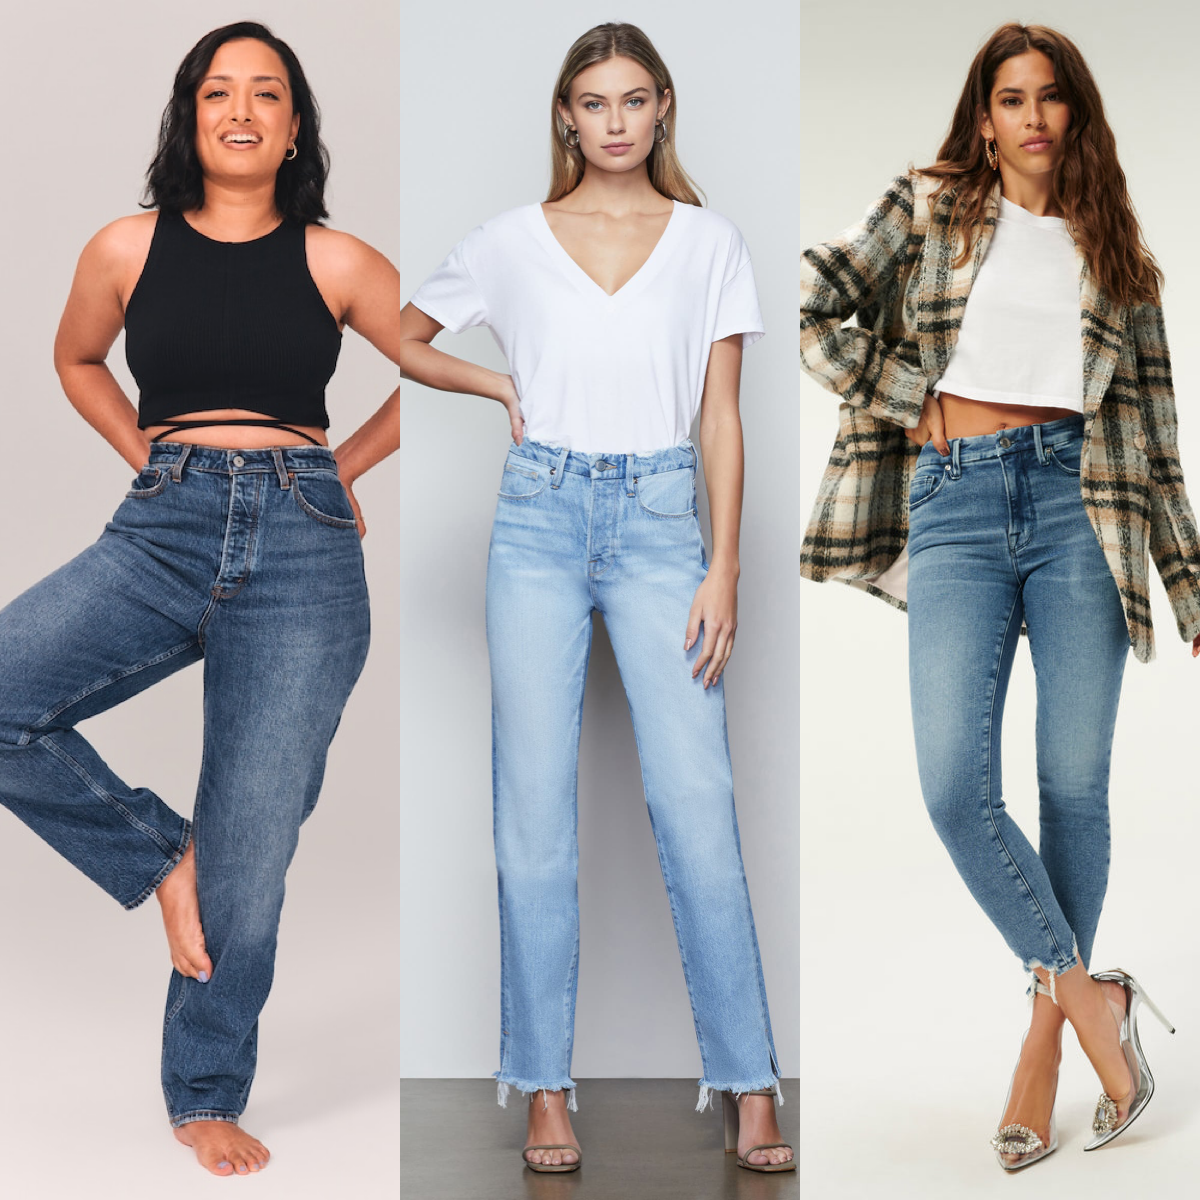 What Are The Best Pairs of Women's Jeans Under $50 - 50 IS NOT OLD - A  Fashion And Beauty Blog For Women Over 50